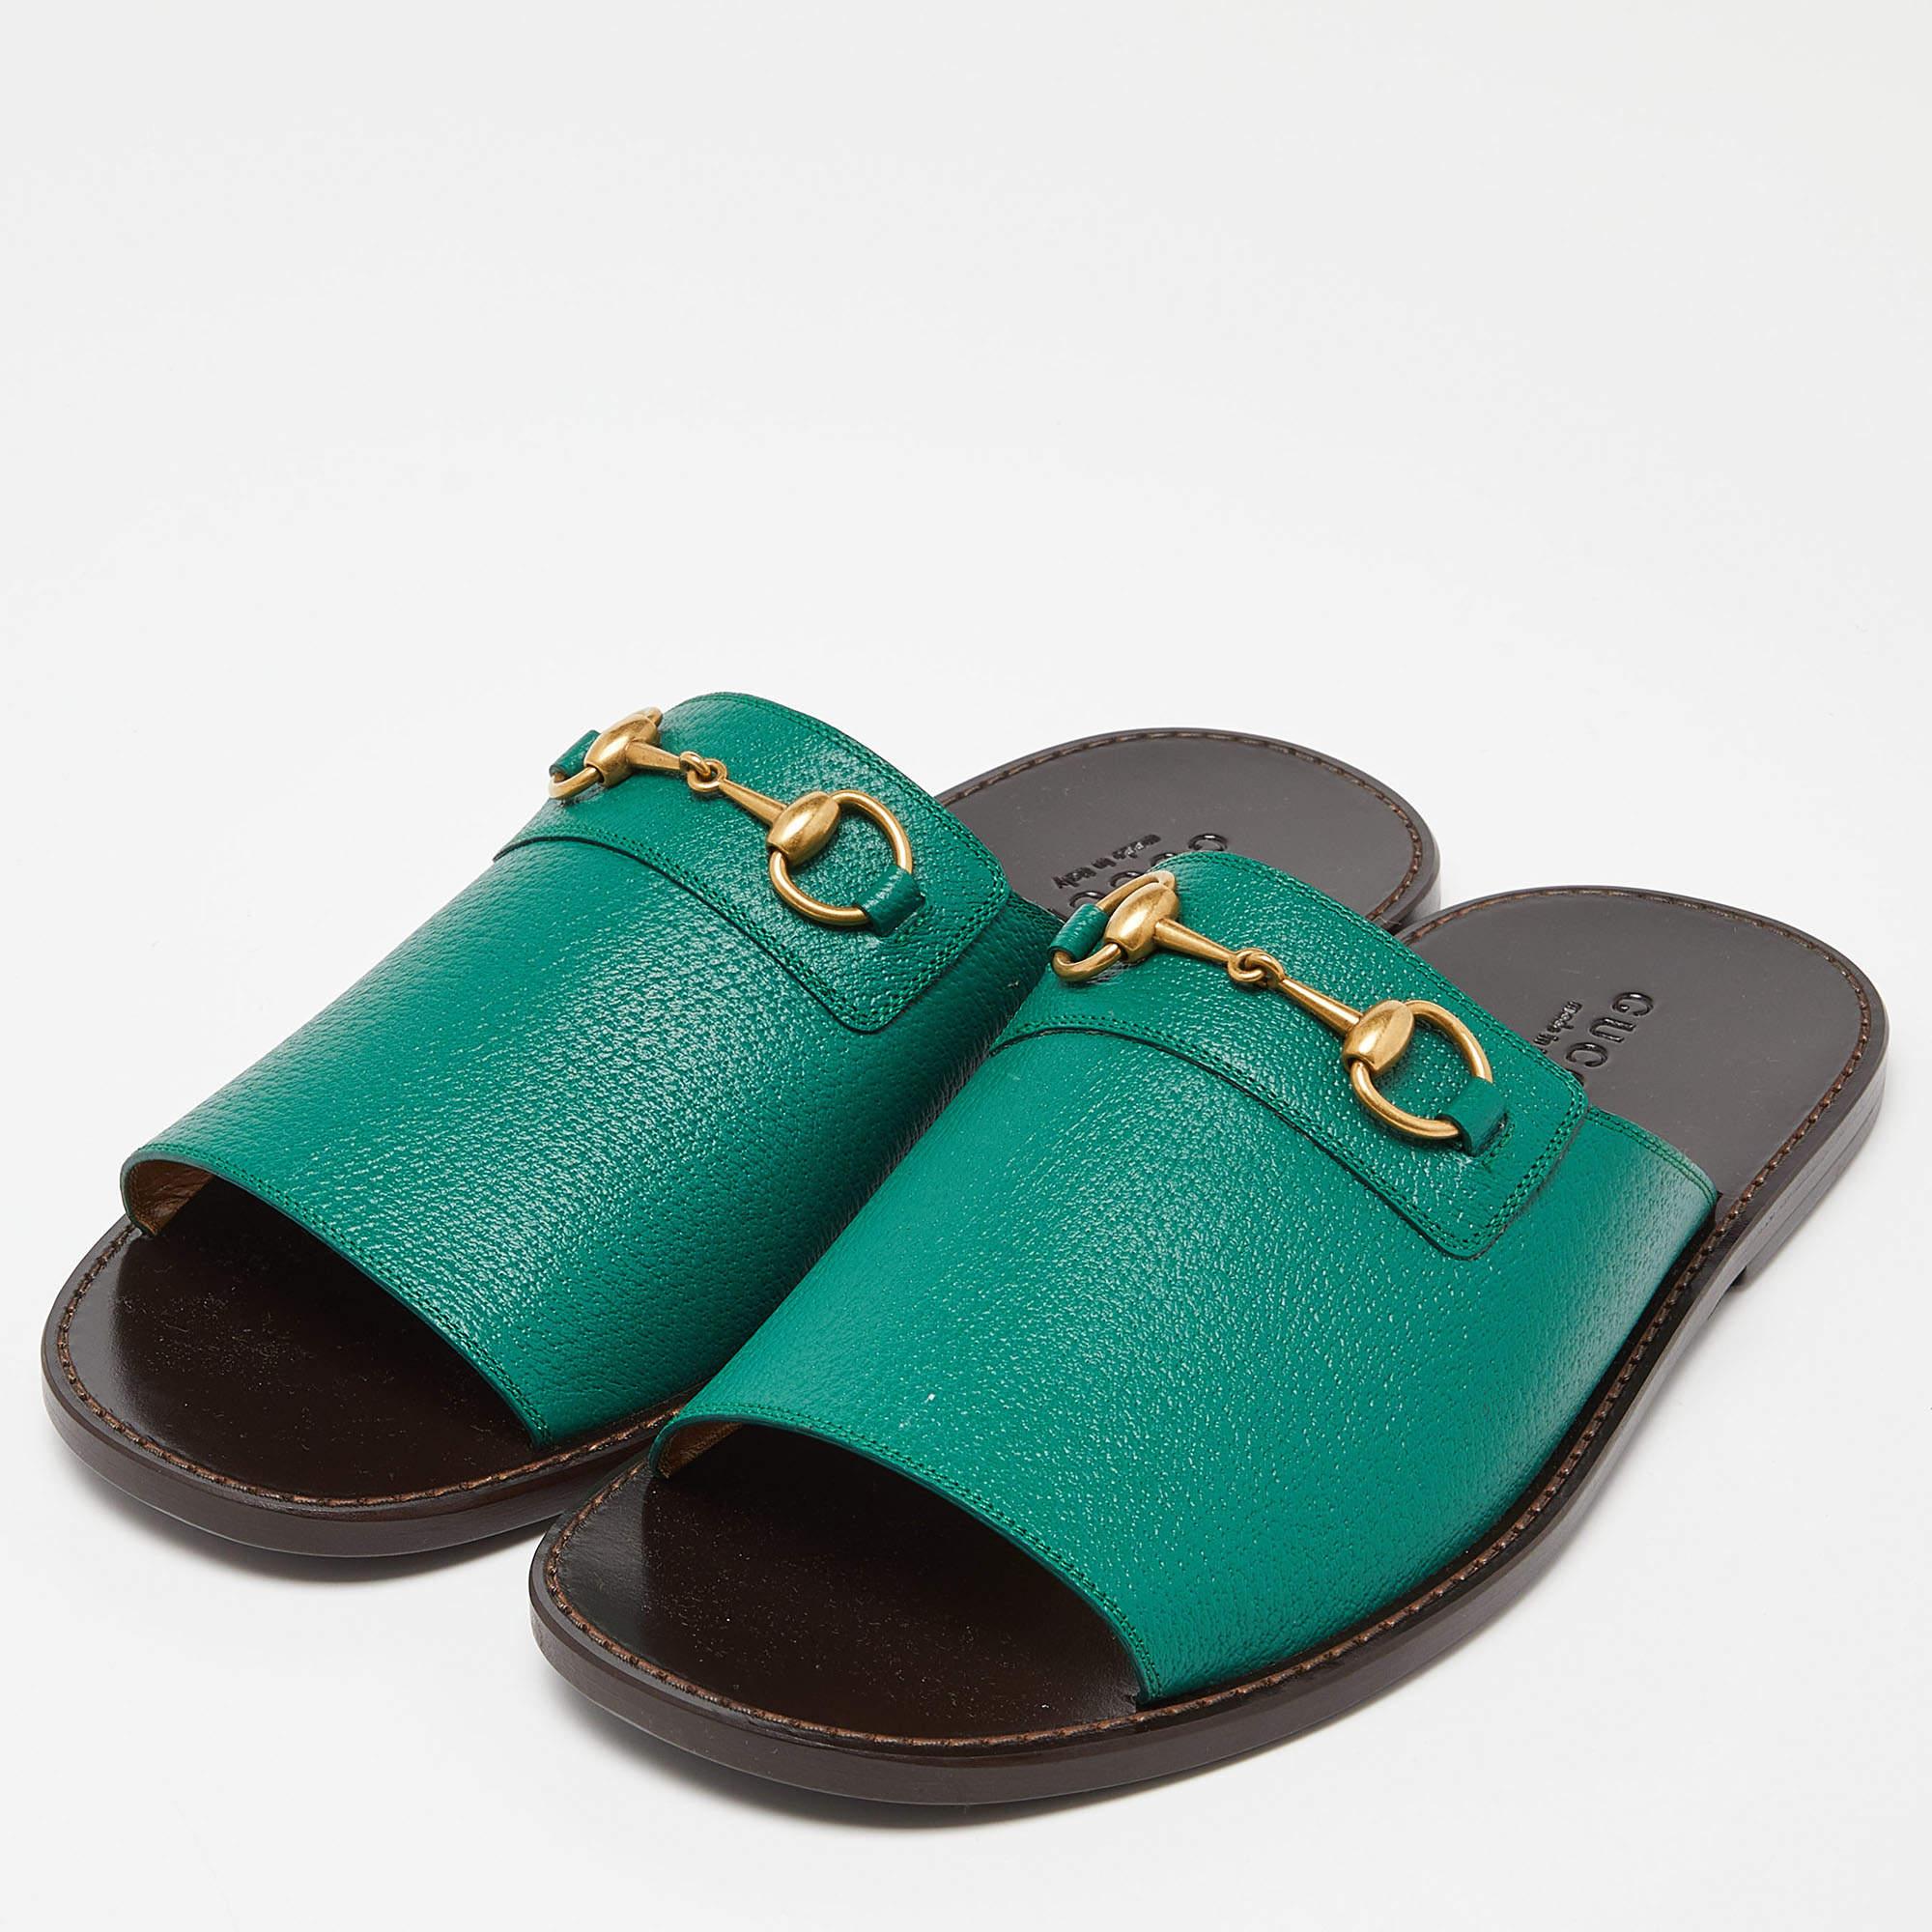 Create effortless styles with these Gucci flat slides. Made of quality materials, they are designed to elevate your OOTD and keep you in comfort all day long.

